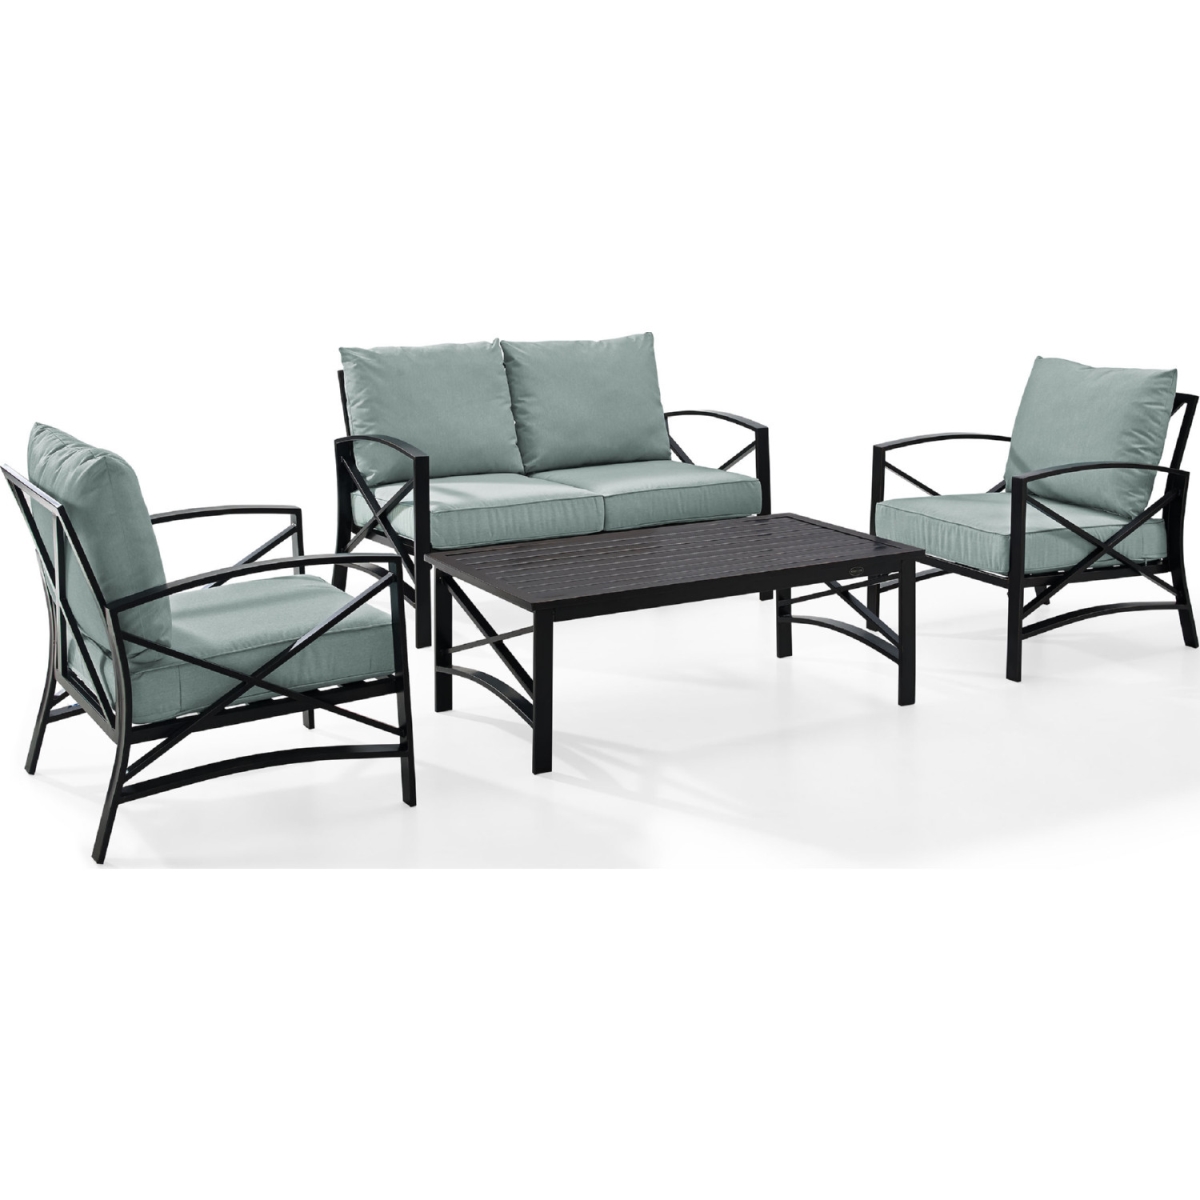 Crosley KO60009BZ-MI 4 Piece Kaplan Outdoor Seating Set with Mist Cushion - Loveseat, Two Chairs, Coffee Table